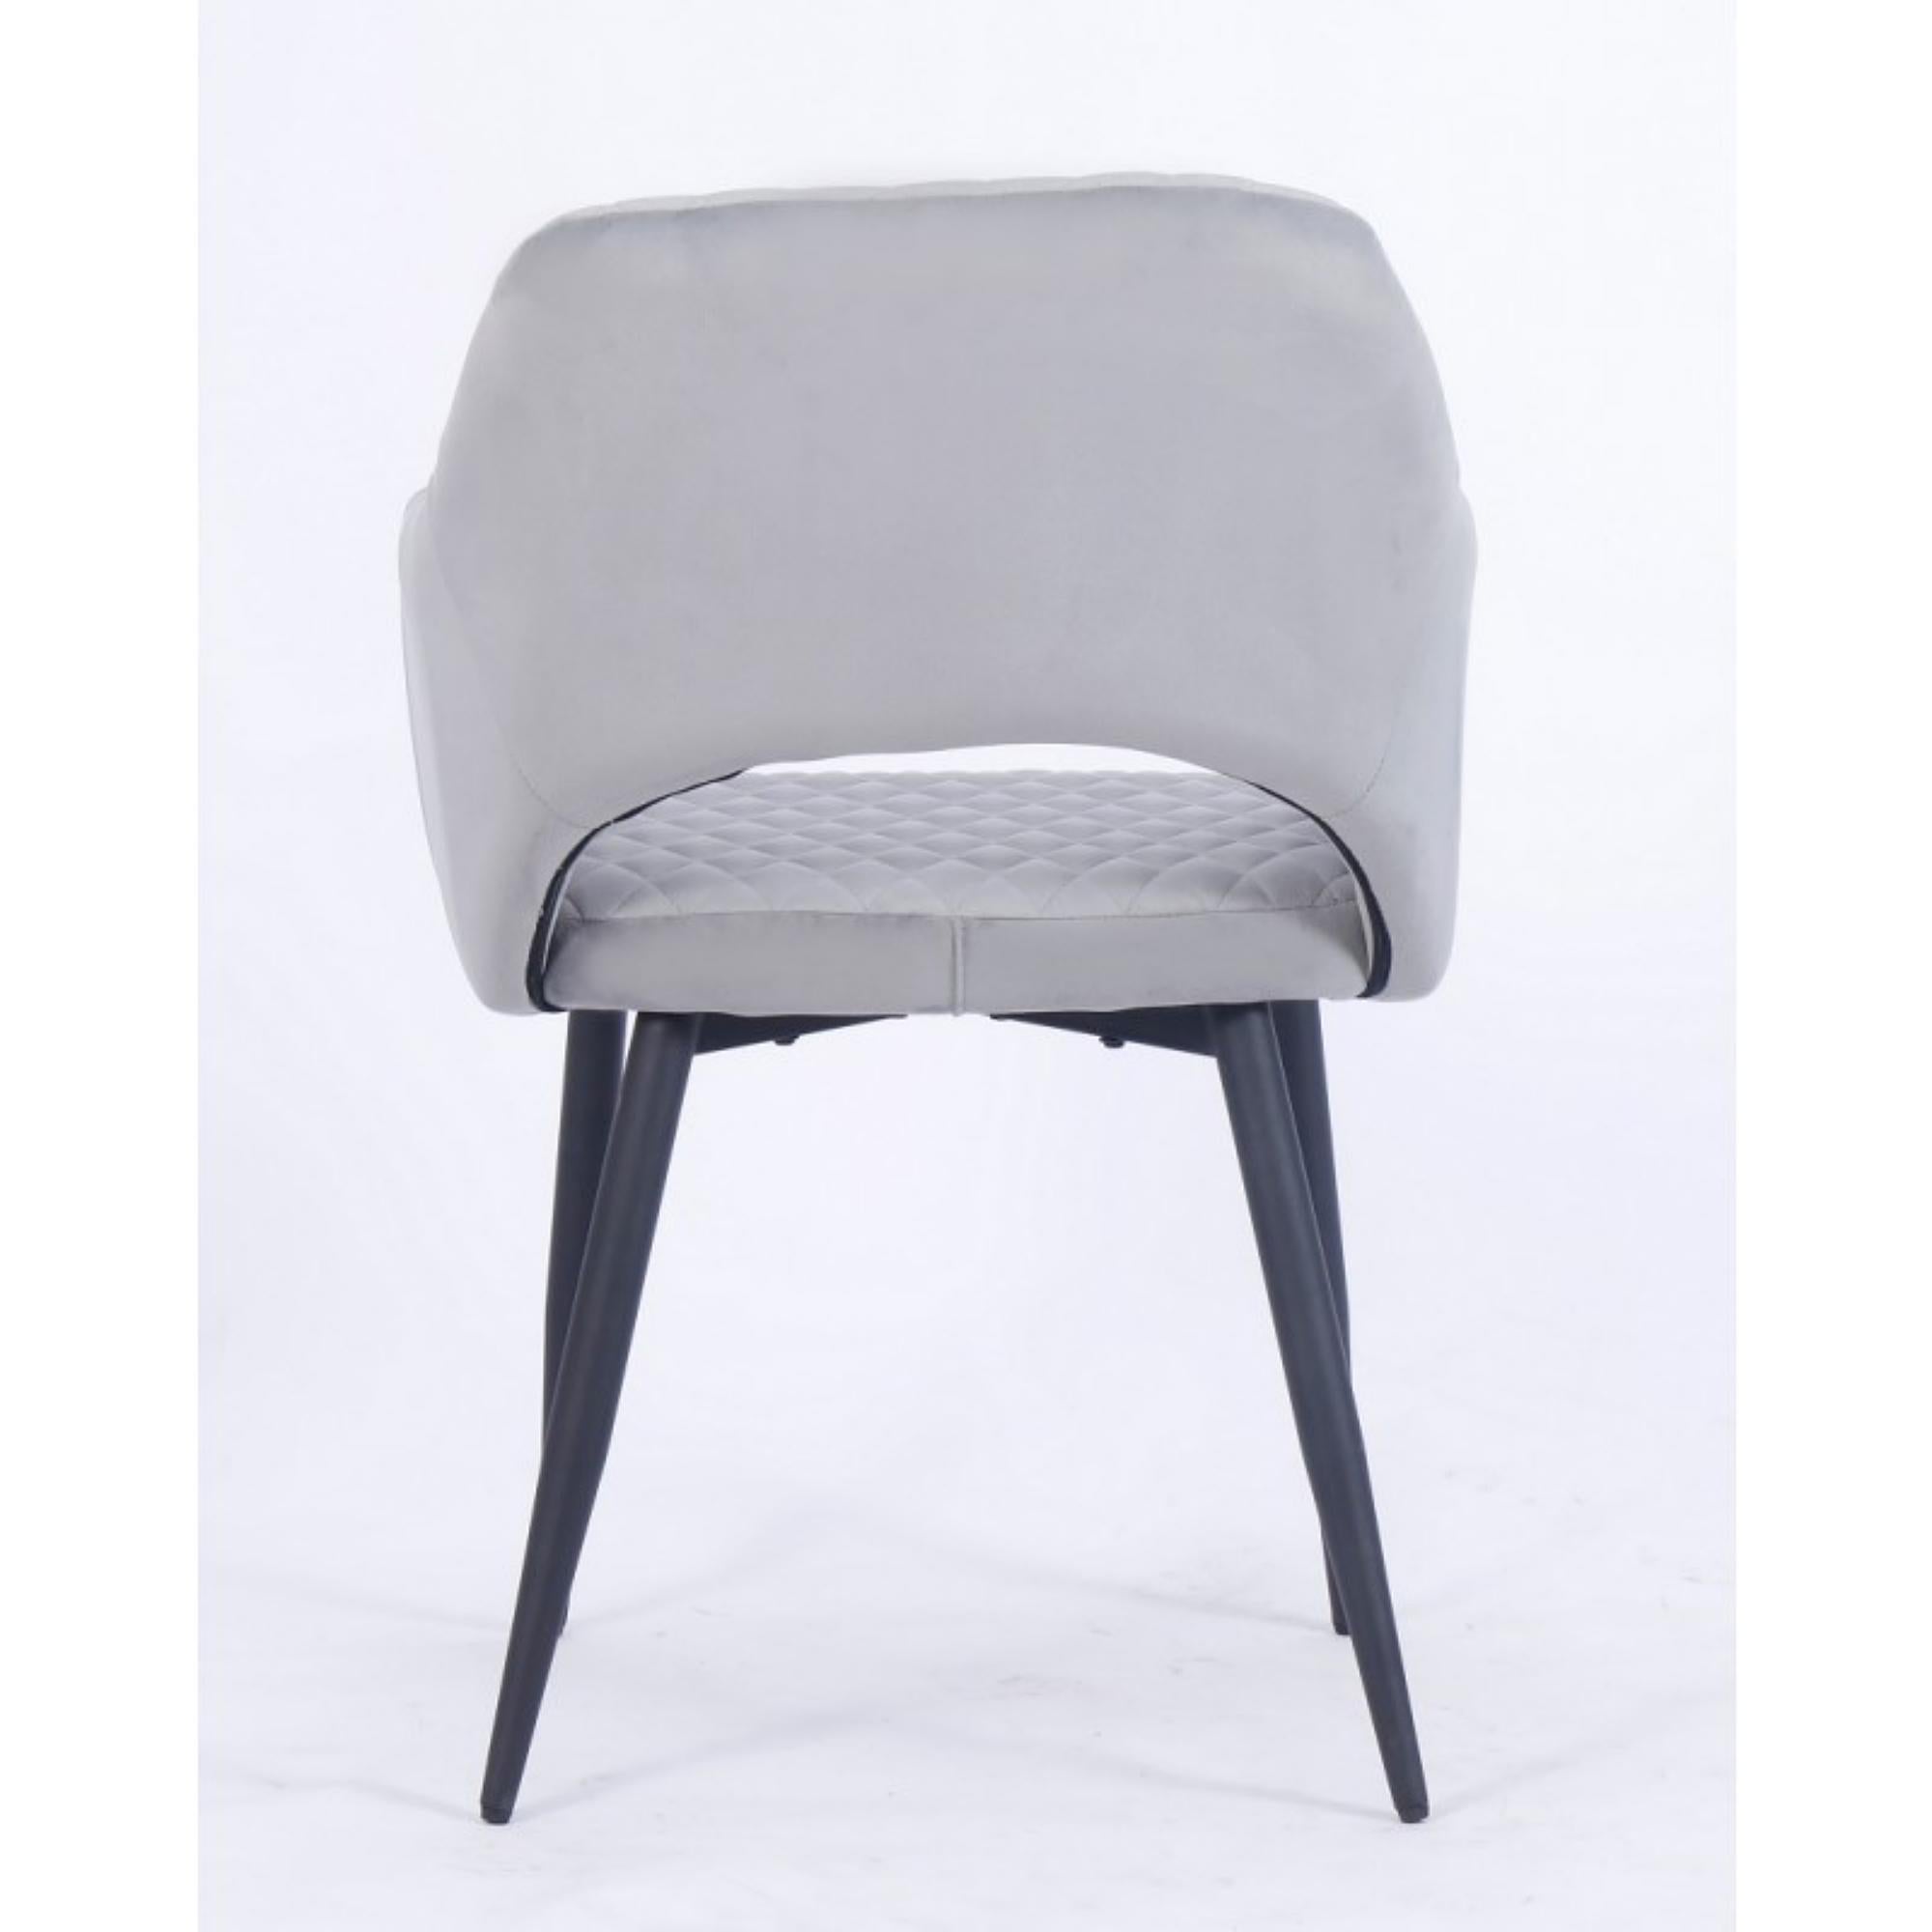 Upholstered Metal Armchair New

Data sheet:

-Design armchair, multipurpose.

-Seat and back in wood and foam rubber, upholstered in mink brown velvet 19 fabric

-Tapered metal legs with black epoxy paint finish

-Other colors